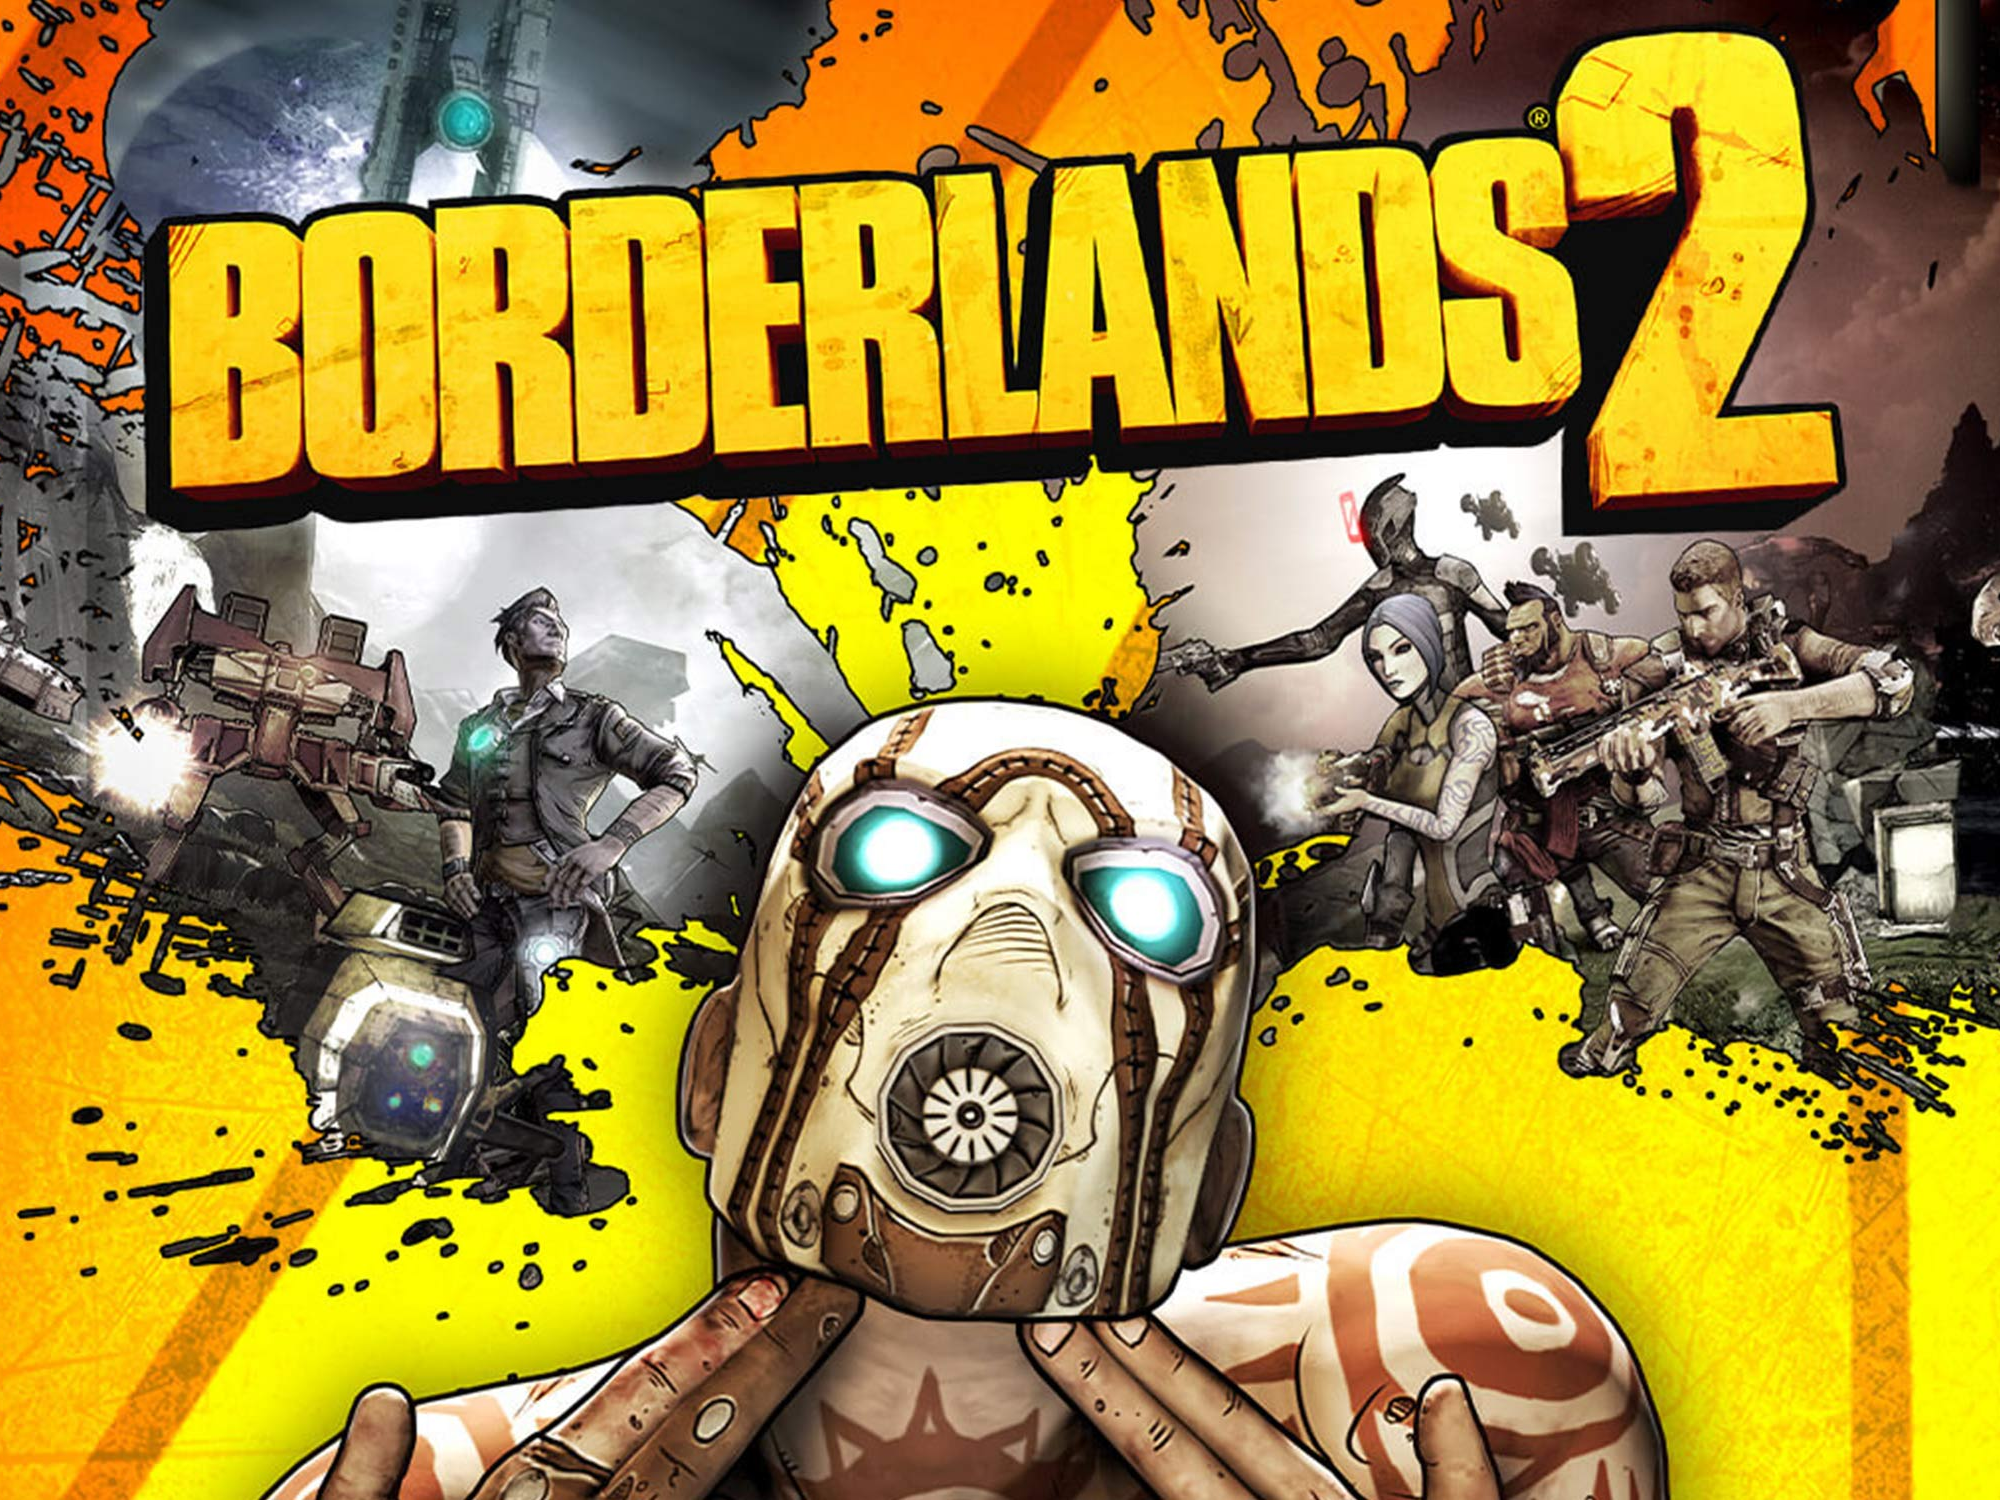 The cover of the Borderlands 2 video game.